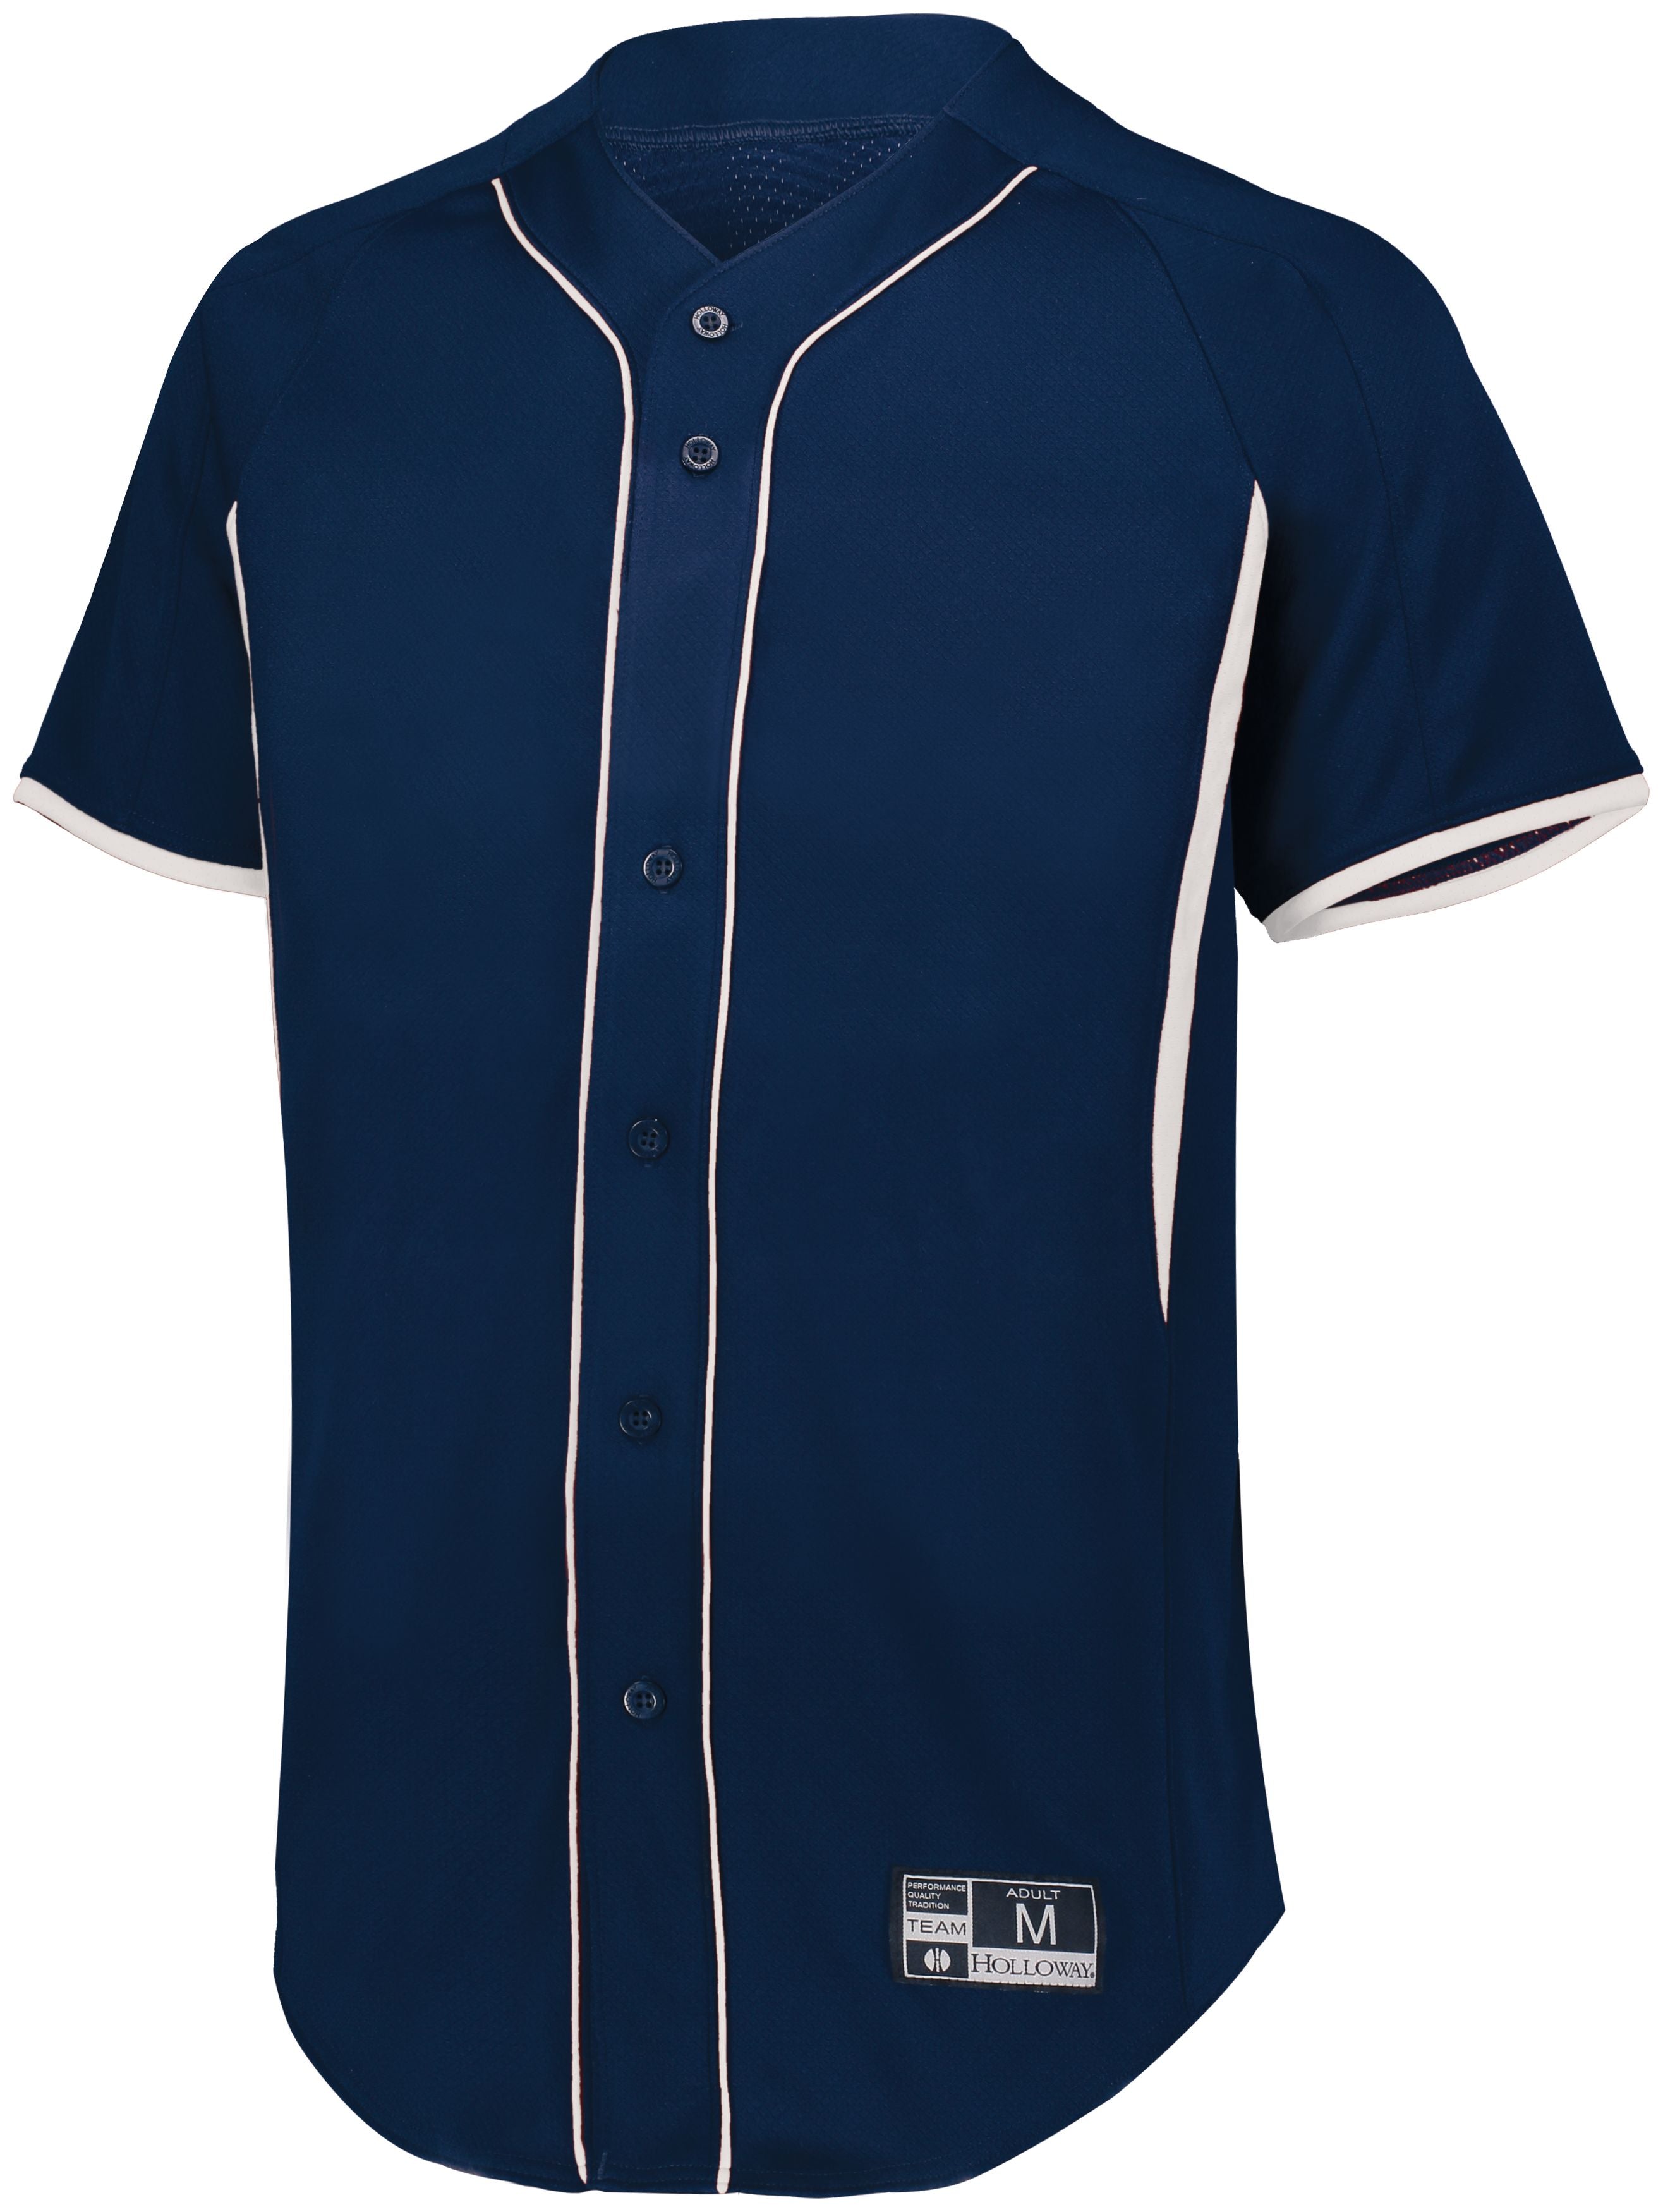 Holloway Game7 Full-Button Baseball Jersey in Navy/White  -Part of the Adult, Adult-Jersey, Baseball, Holloway, Shirts, All-Sports, All-Sports-1 product lines at KanaleyCreations.com